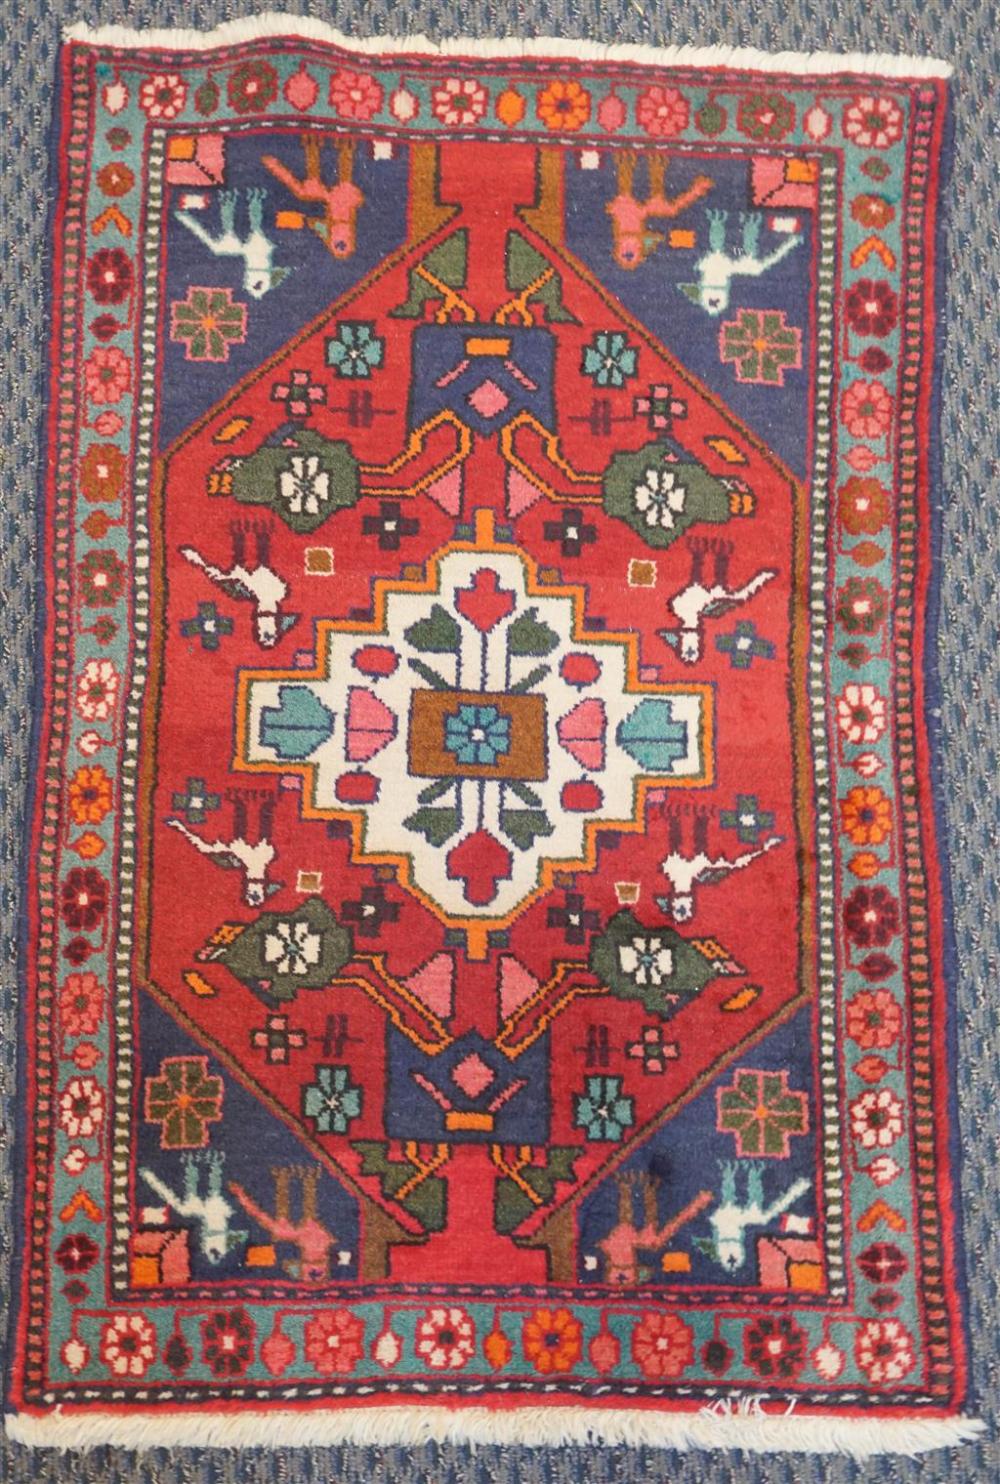 MALAYER RUG, 3 FT 10 IN X 2 FT